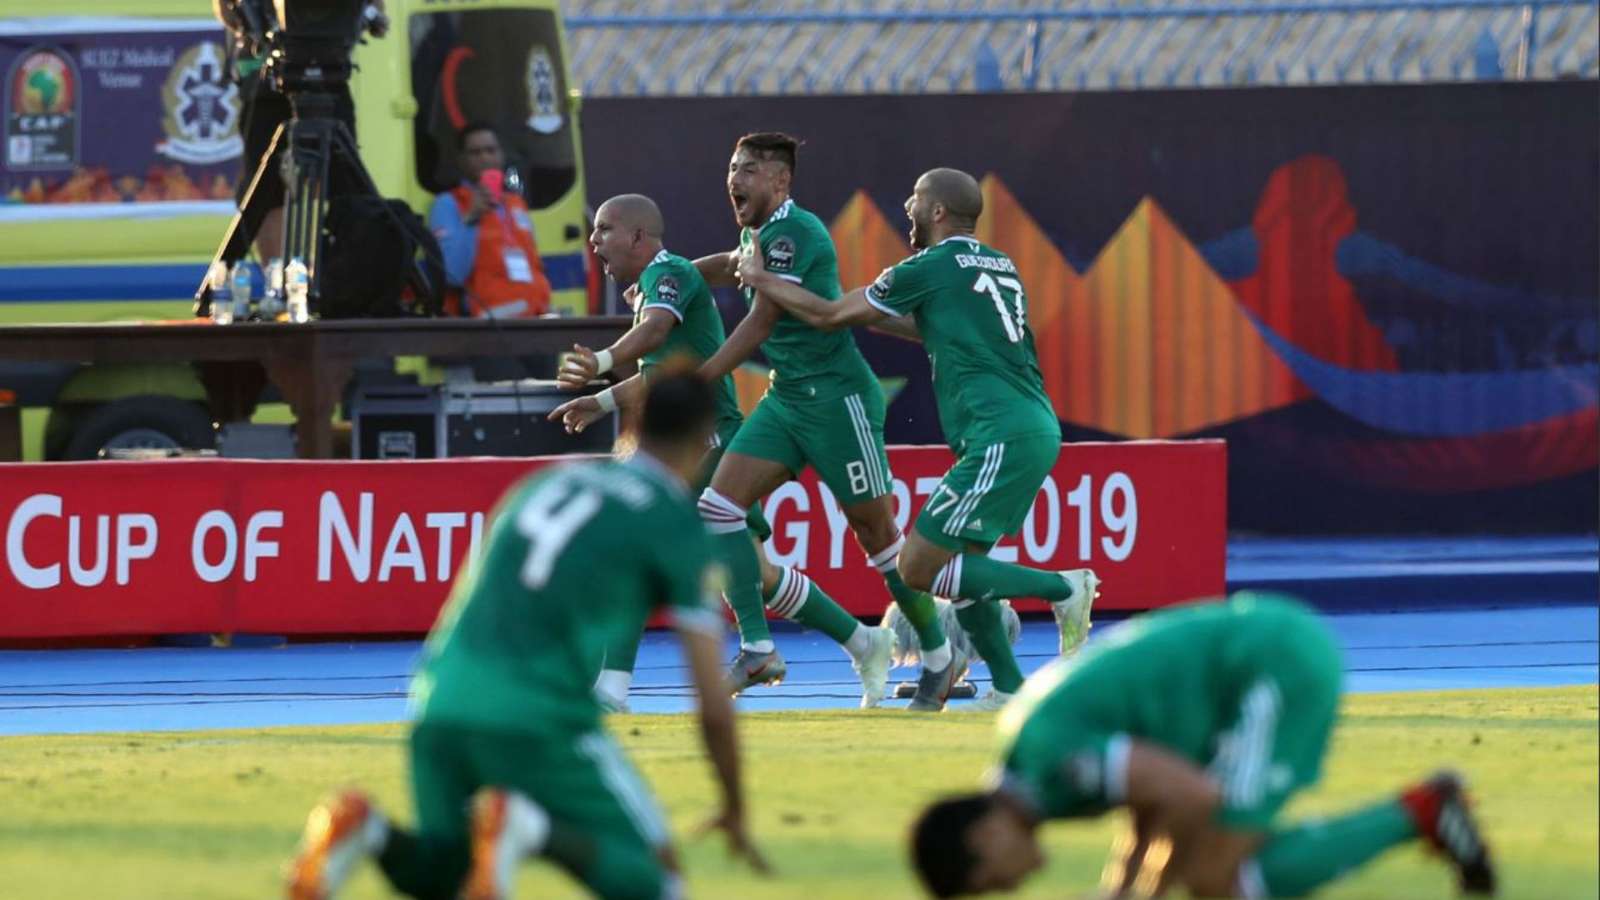 AFCON Highlights: Ivory Coast 1-1 Algeria (3-4 on Penalties) & Madagascar 0-3 Tunisia | Africa Cup Of Nations